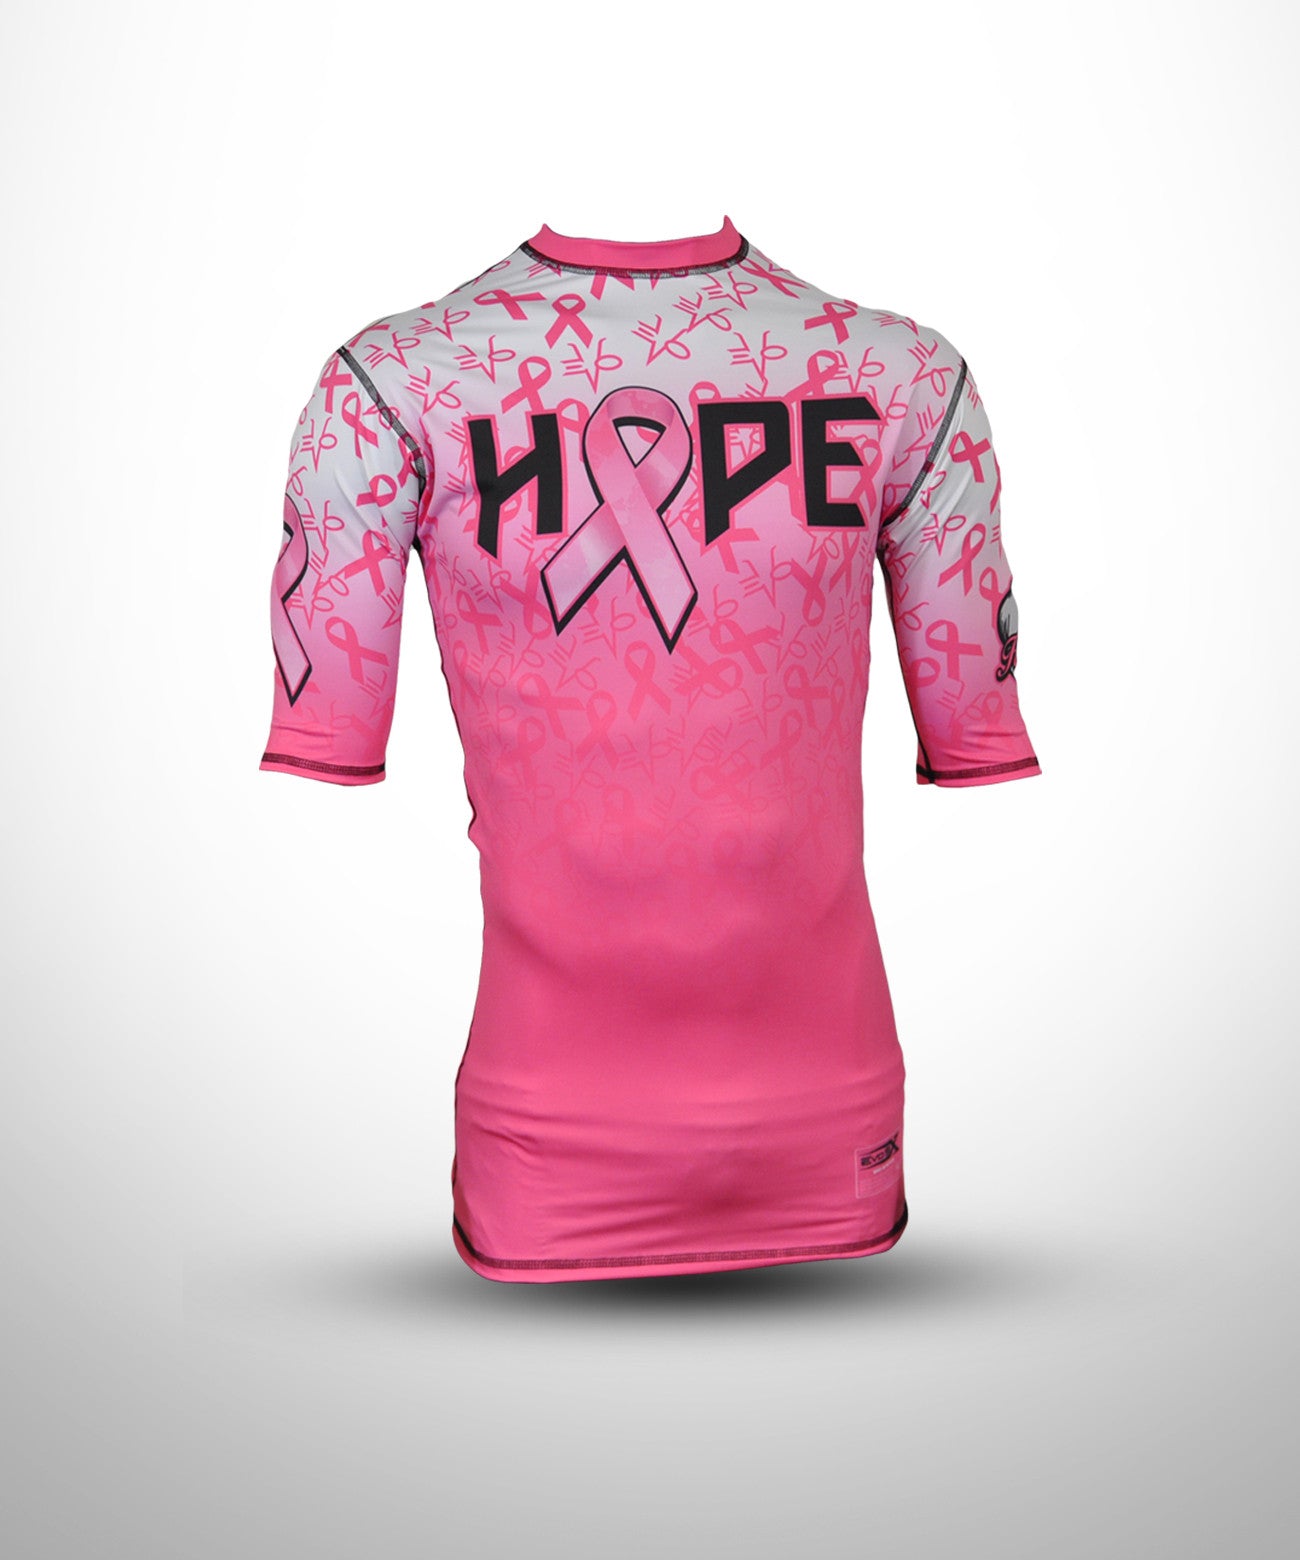 OA Apparel Breast Cancer Awareness - Hope - Short Sleeve Jersey - Pink Camo (Customized Buy-In) M